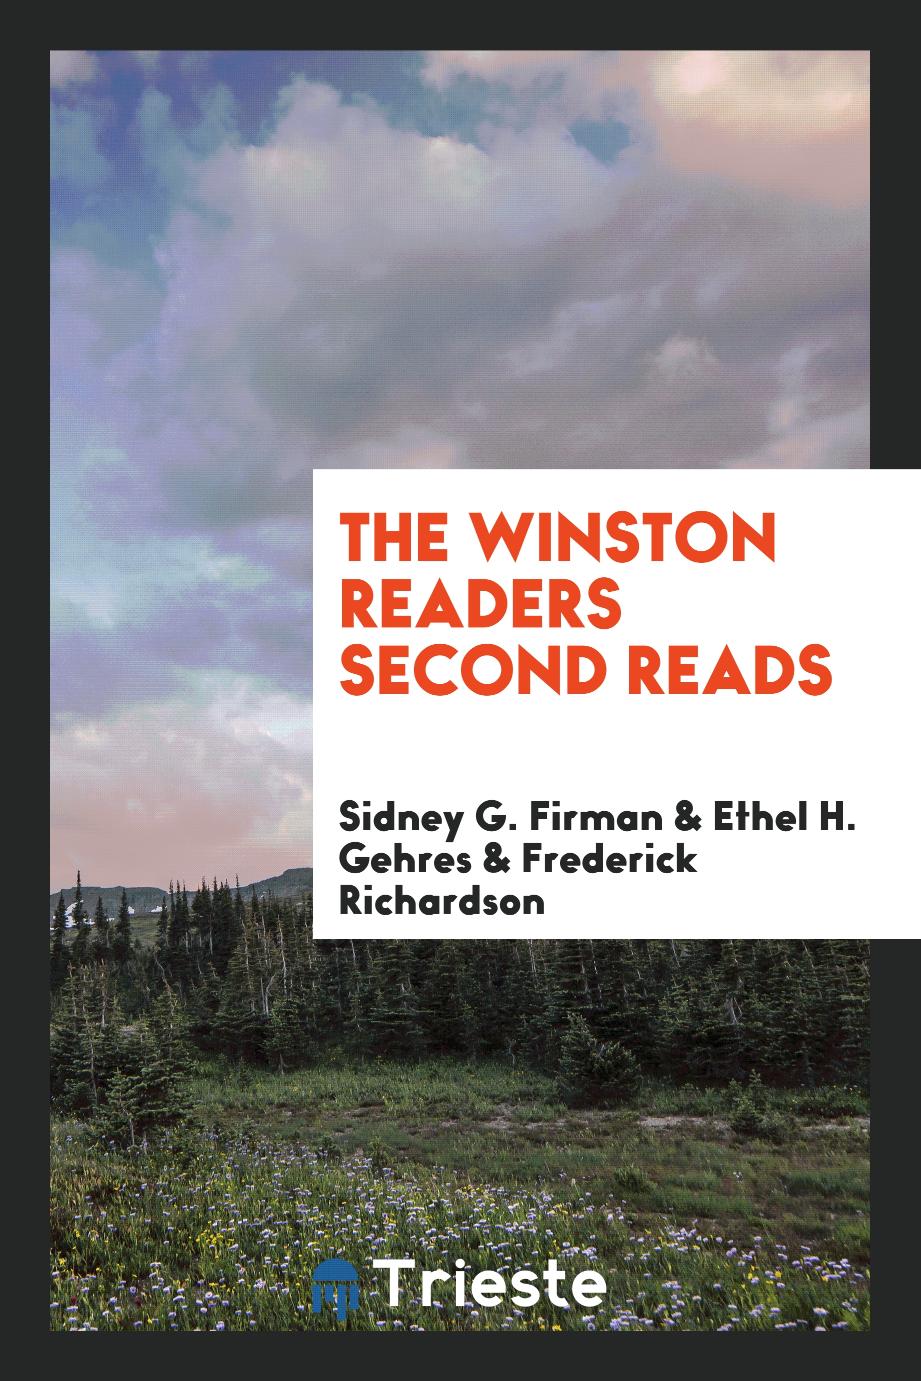 The Winston Readers Second Reads